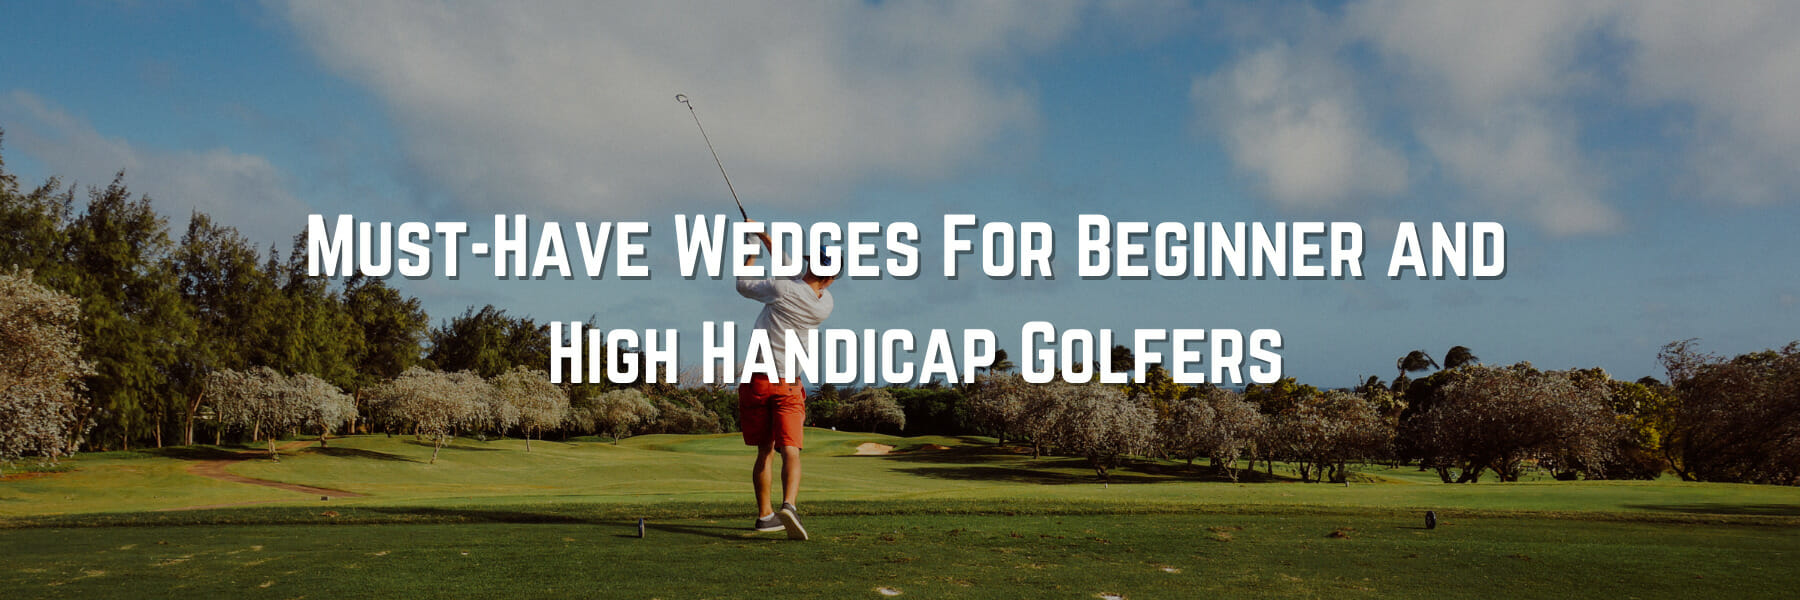 Must-Have Golf Wedges For Beginner and High Handicap Golfers